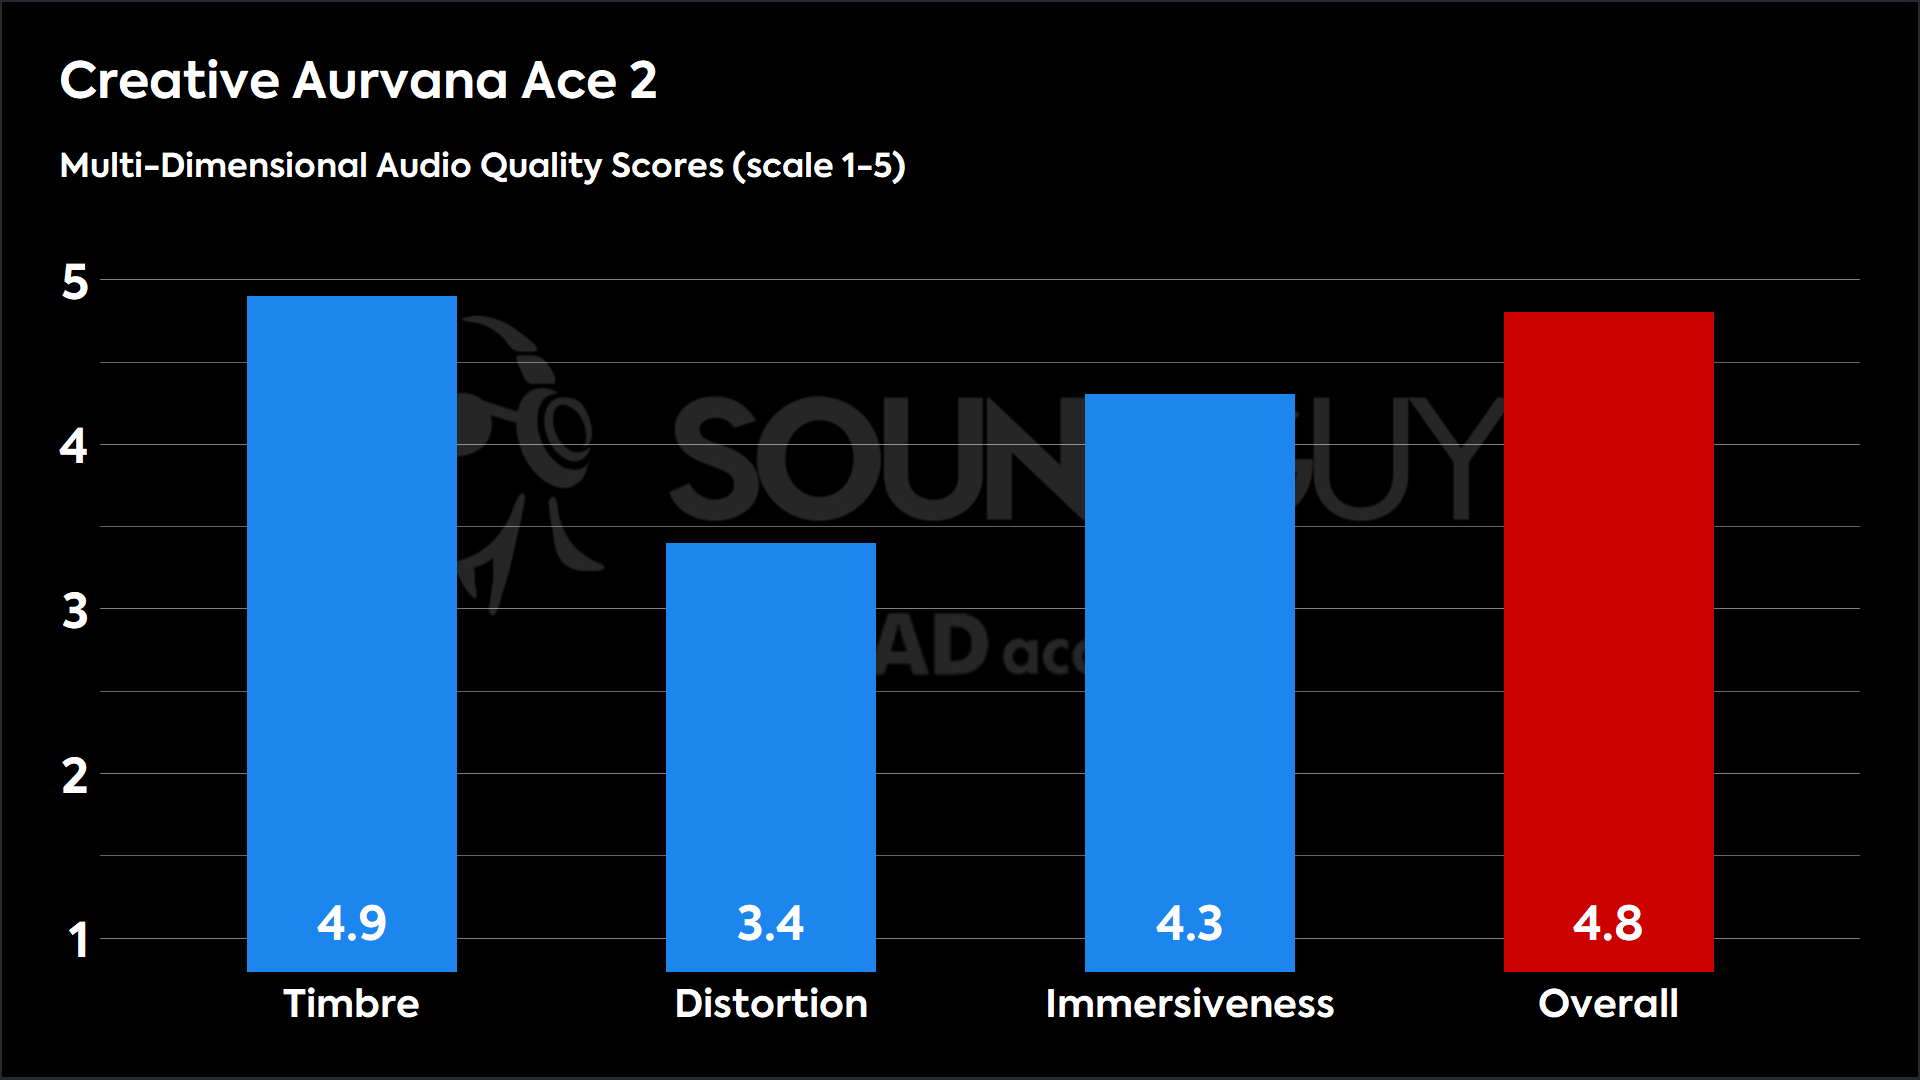 Bar chart showing MDAQS results for Creative Aurvana Ace 2